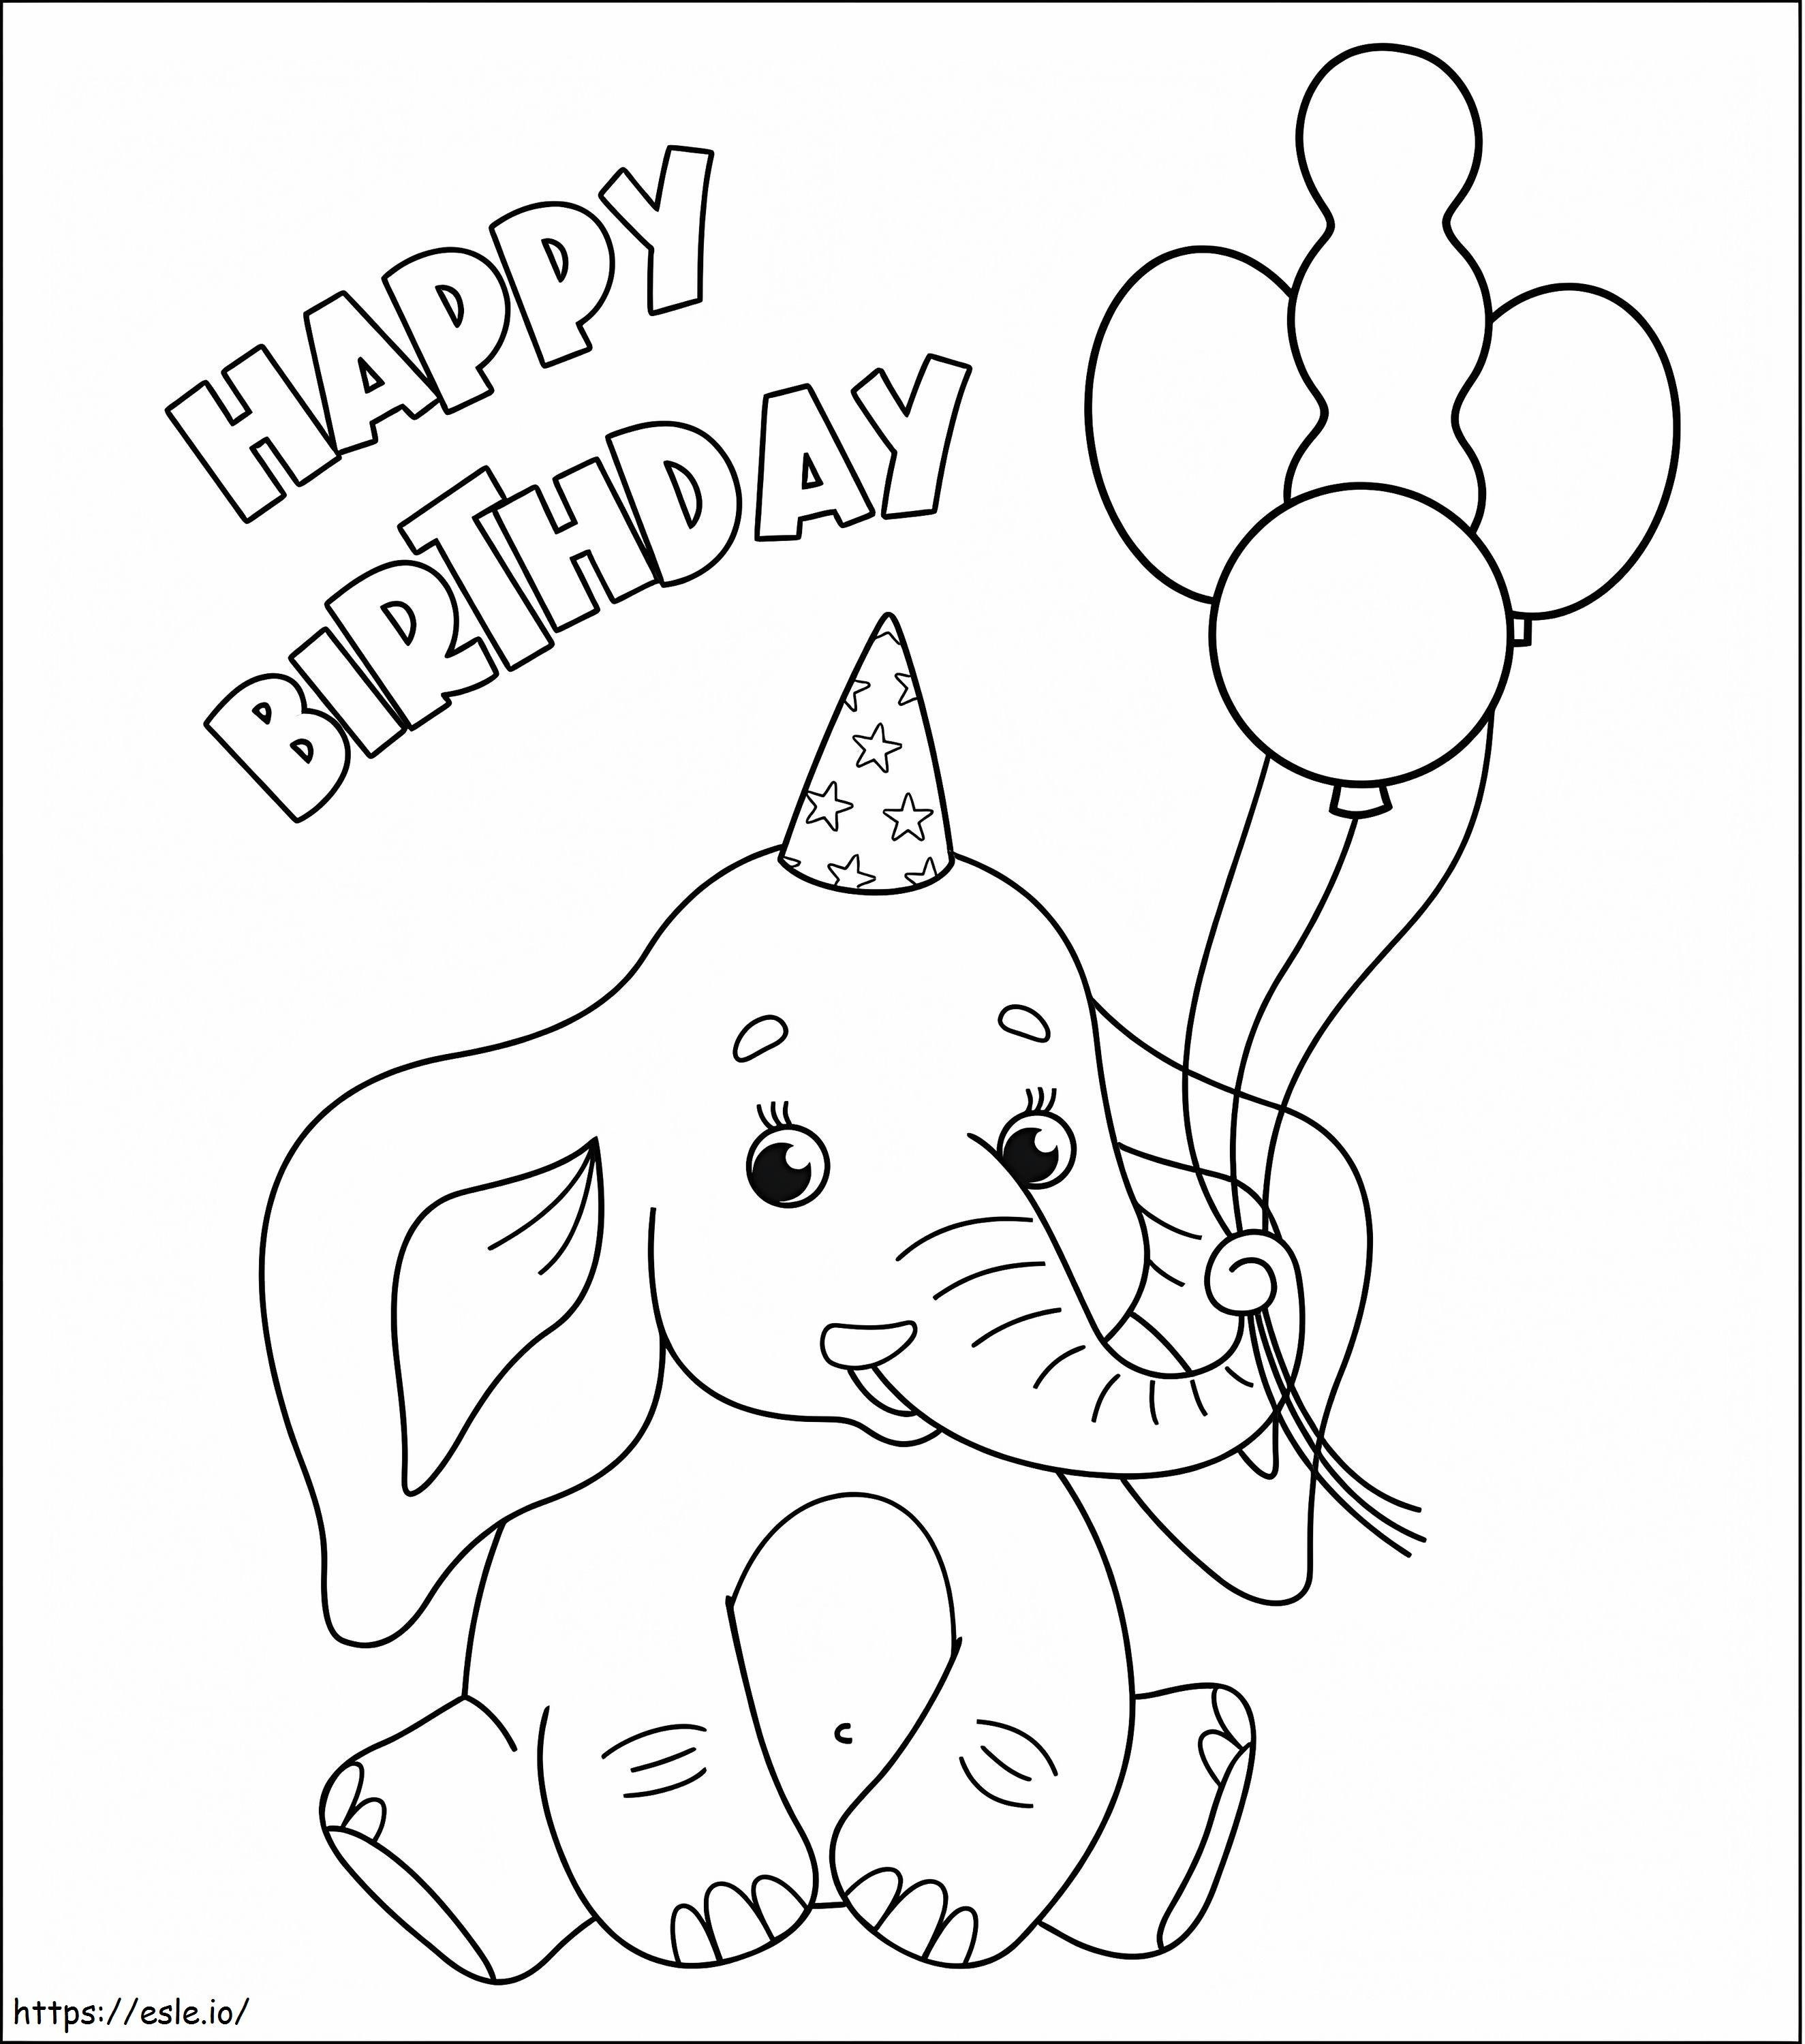 Elephant Birthday coloring page